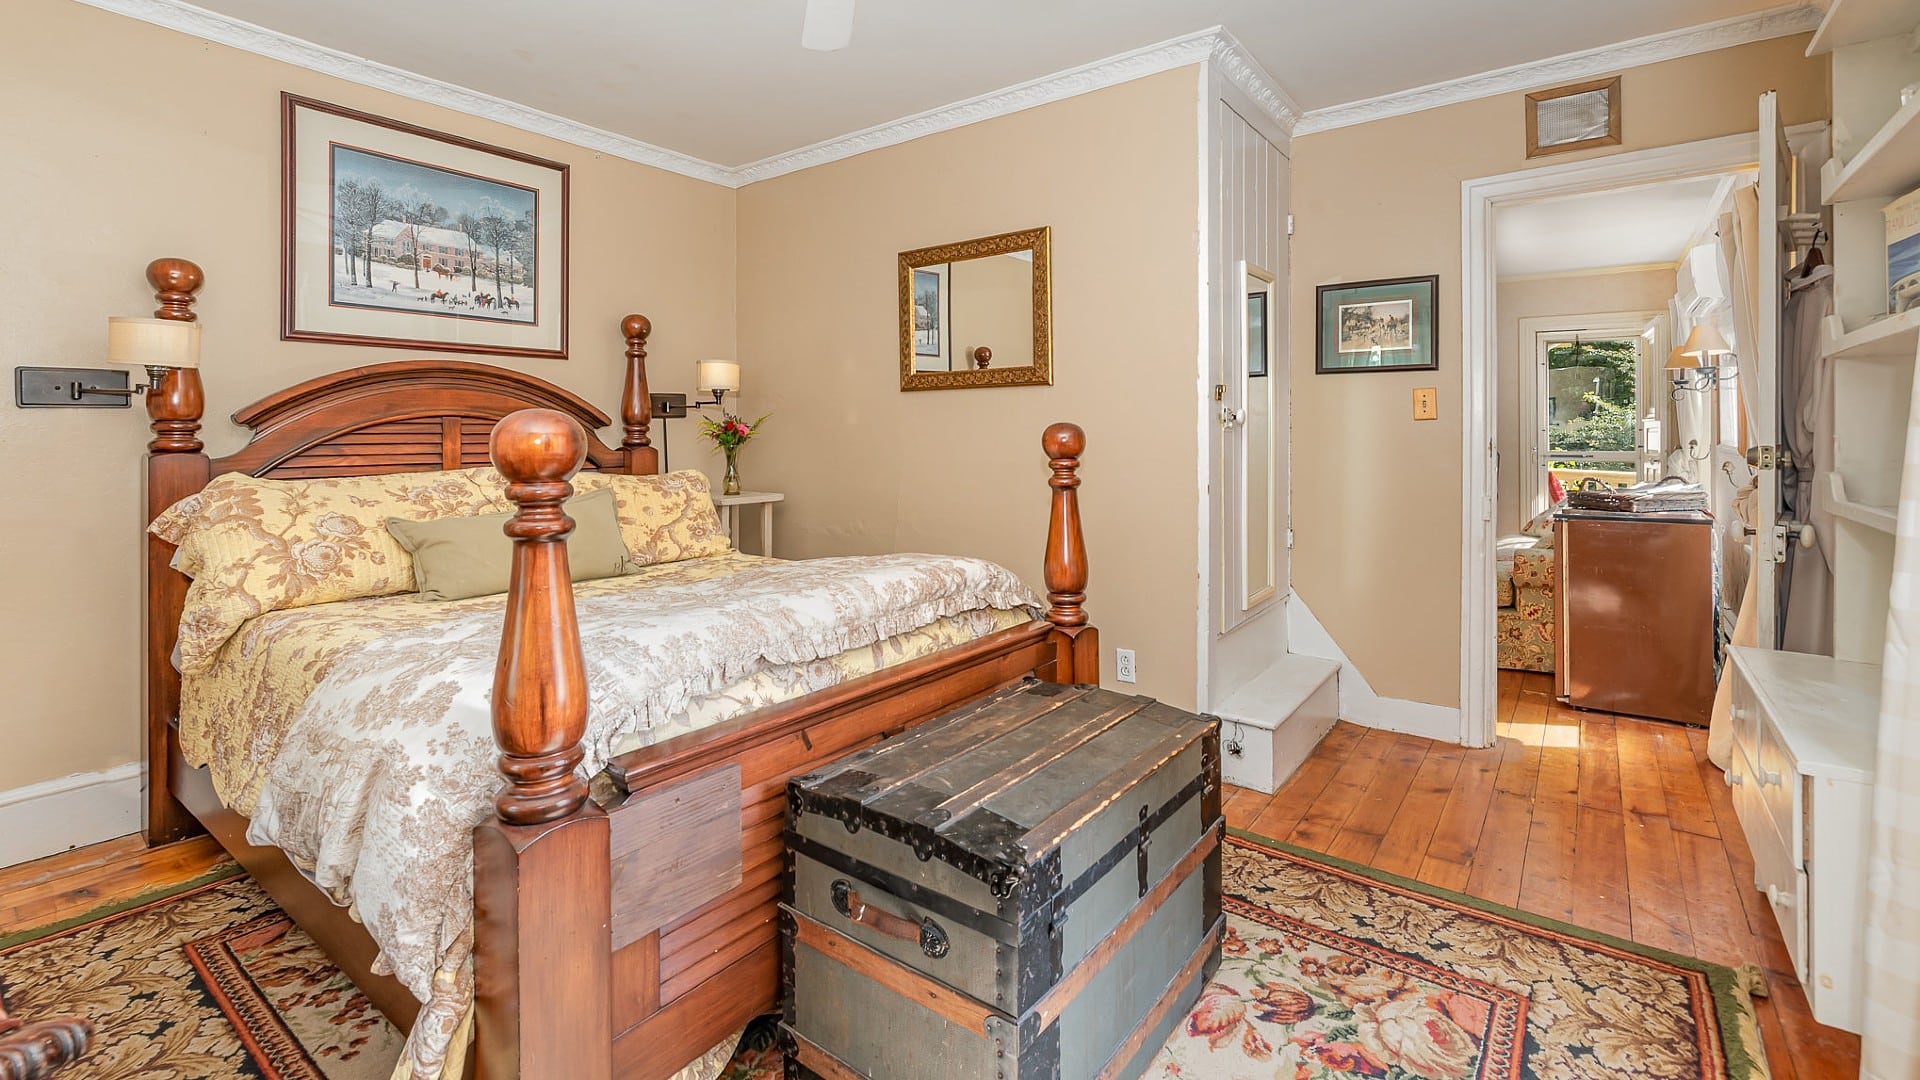 Bedroom with four poster bed, hardwood floors, decorative rug and doorway leading to an adjacent living room